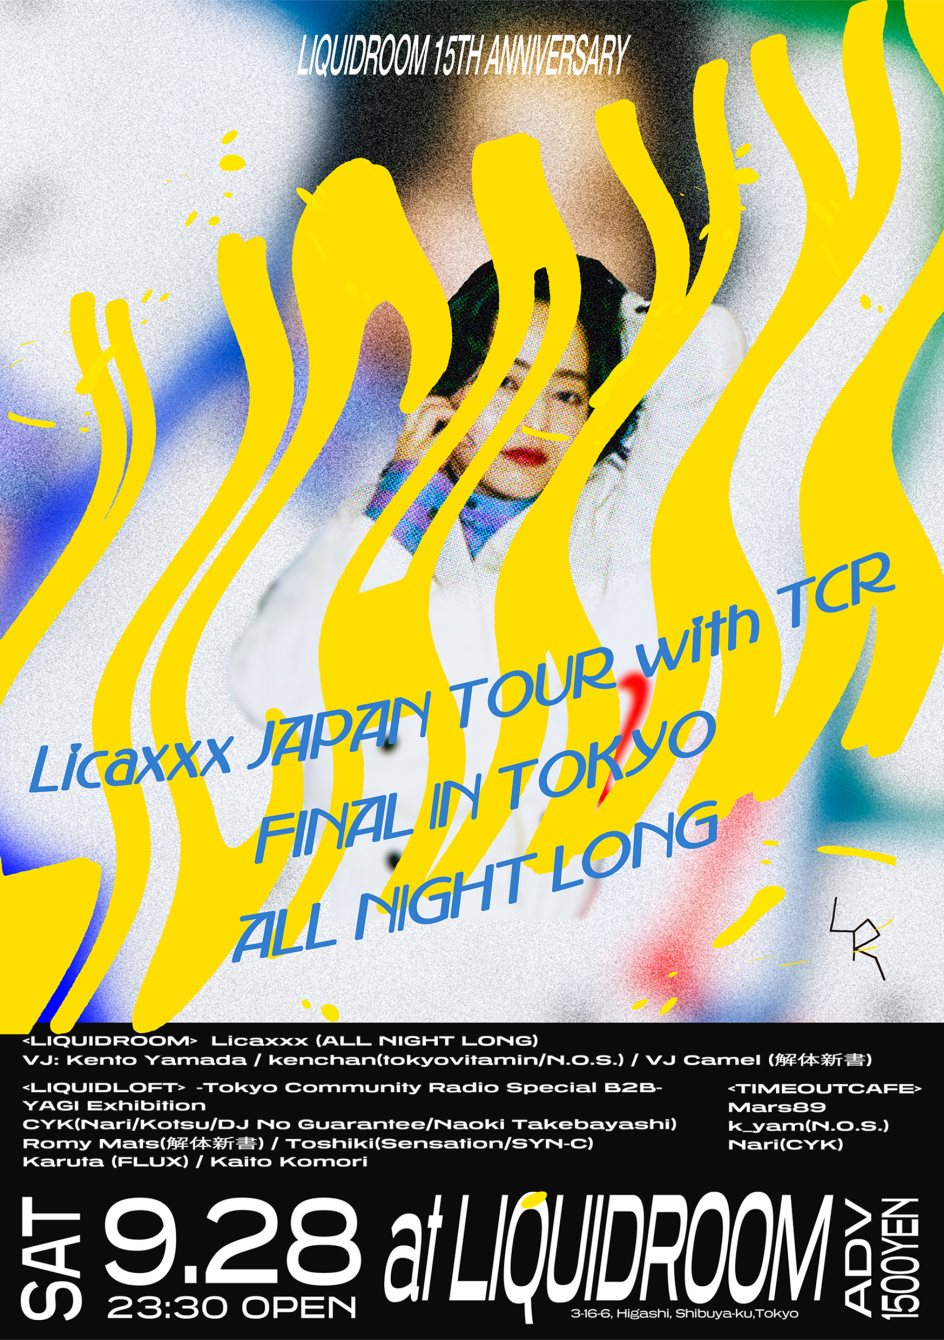 Liquidroom 15th Anniversary Licaxxx Japan Tour with TCR Final in Tokyo All Night Long - Flyer front